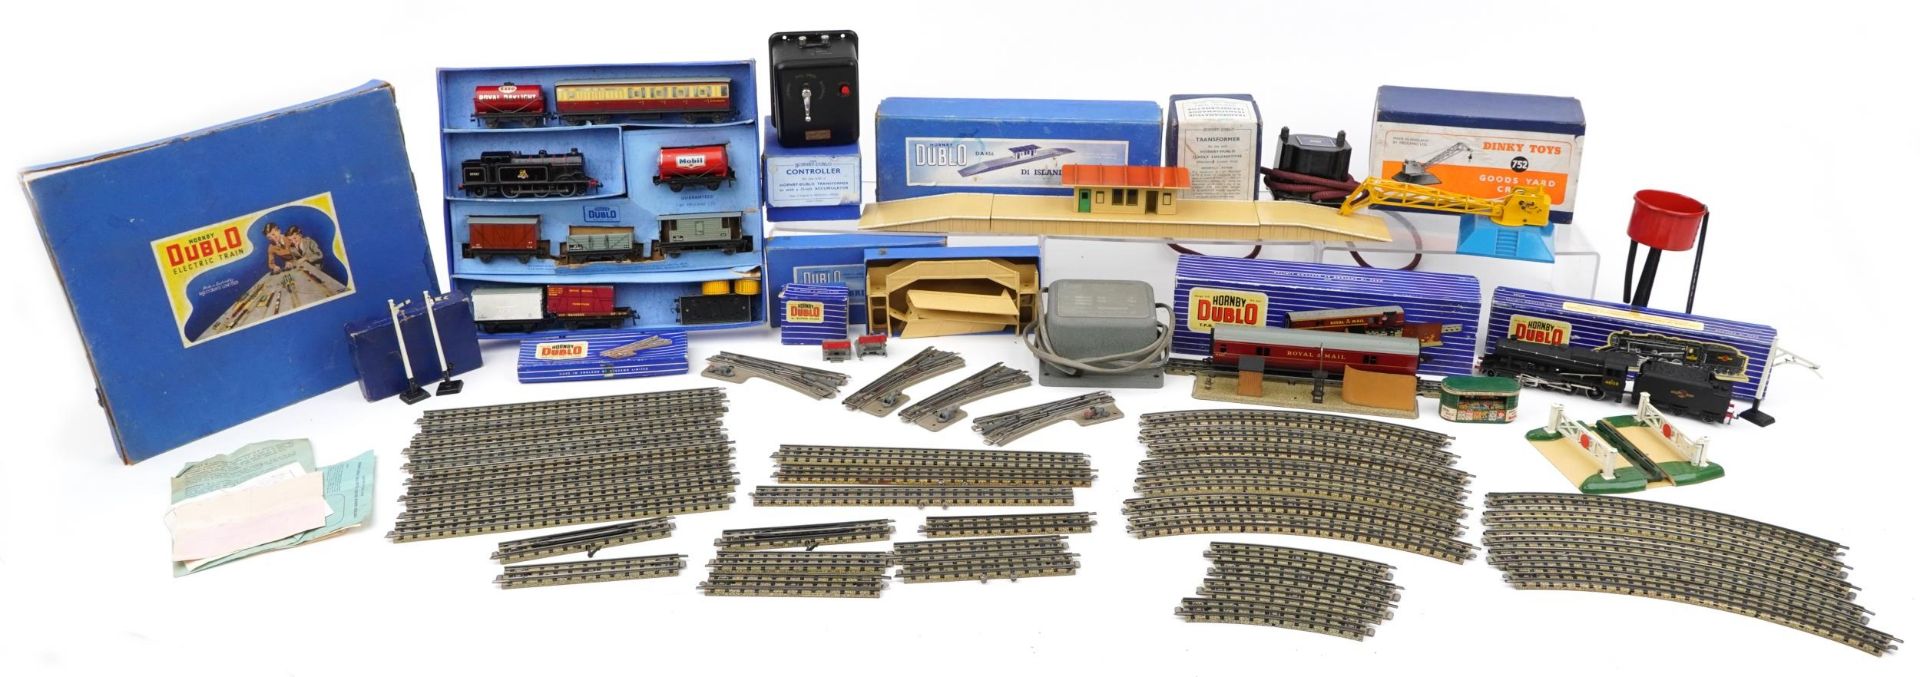 Hornby Dublo model railway trains and accessories with boxes including LT25LMR Freight Locomotive